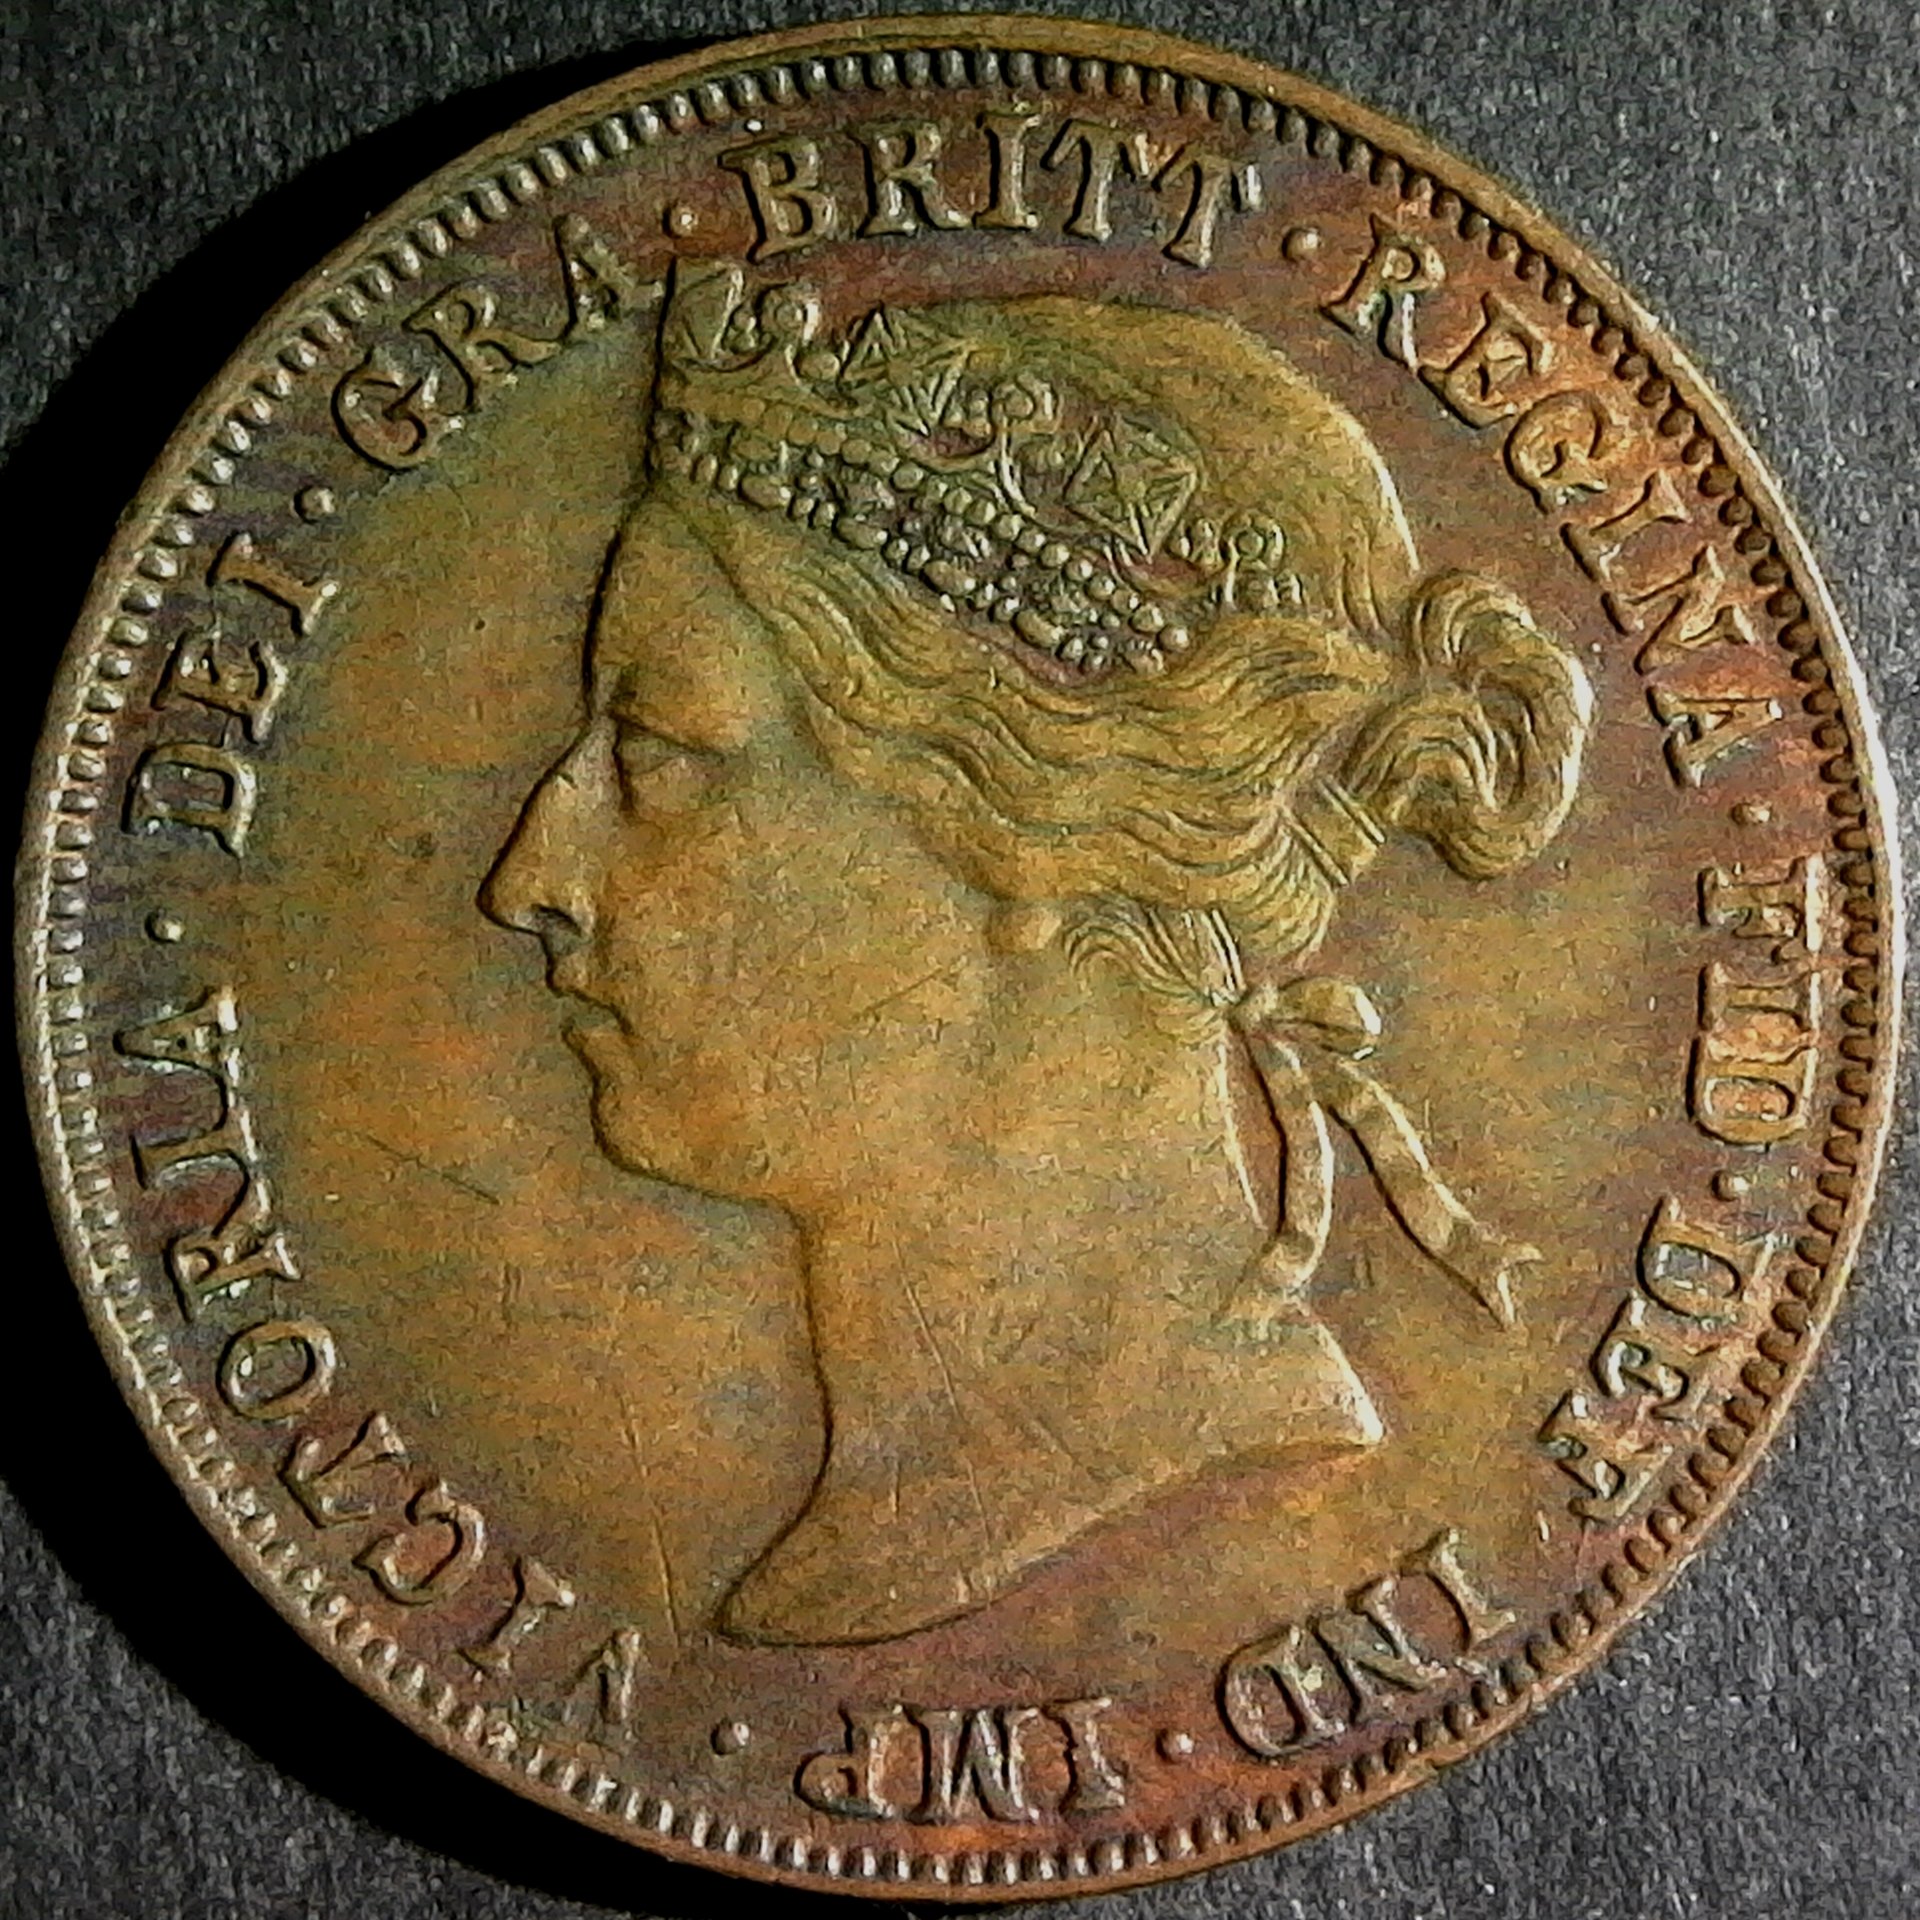 East Africa Protectorate 1 Pice 1898 obv.jpg